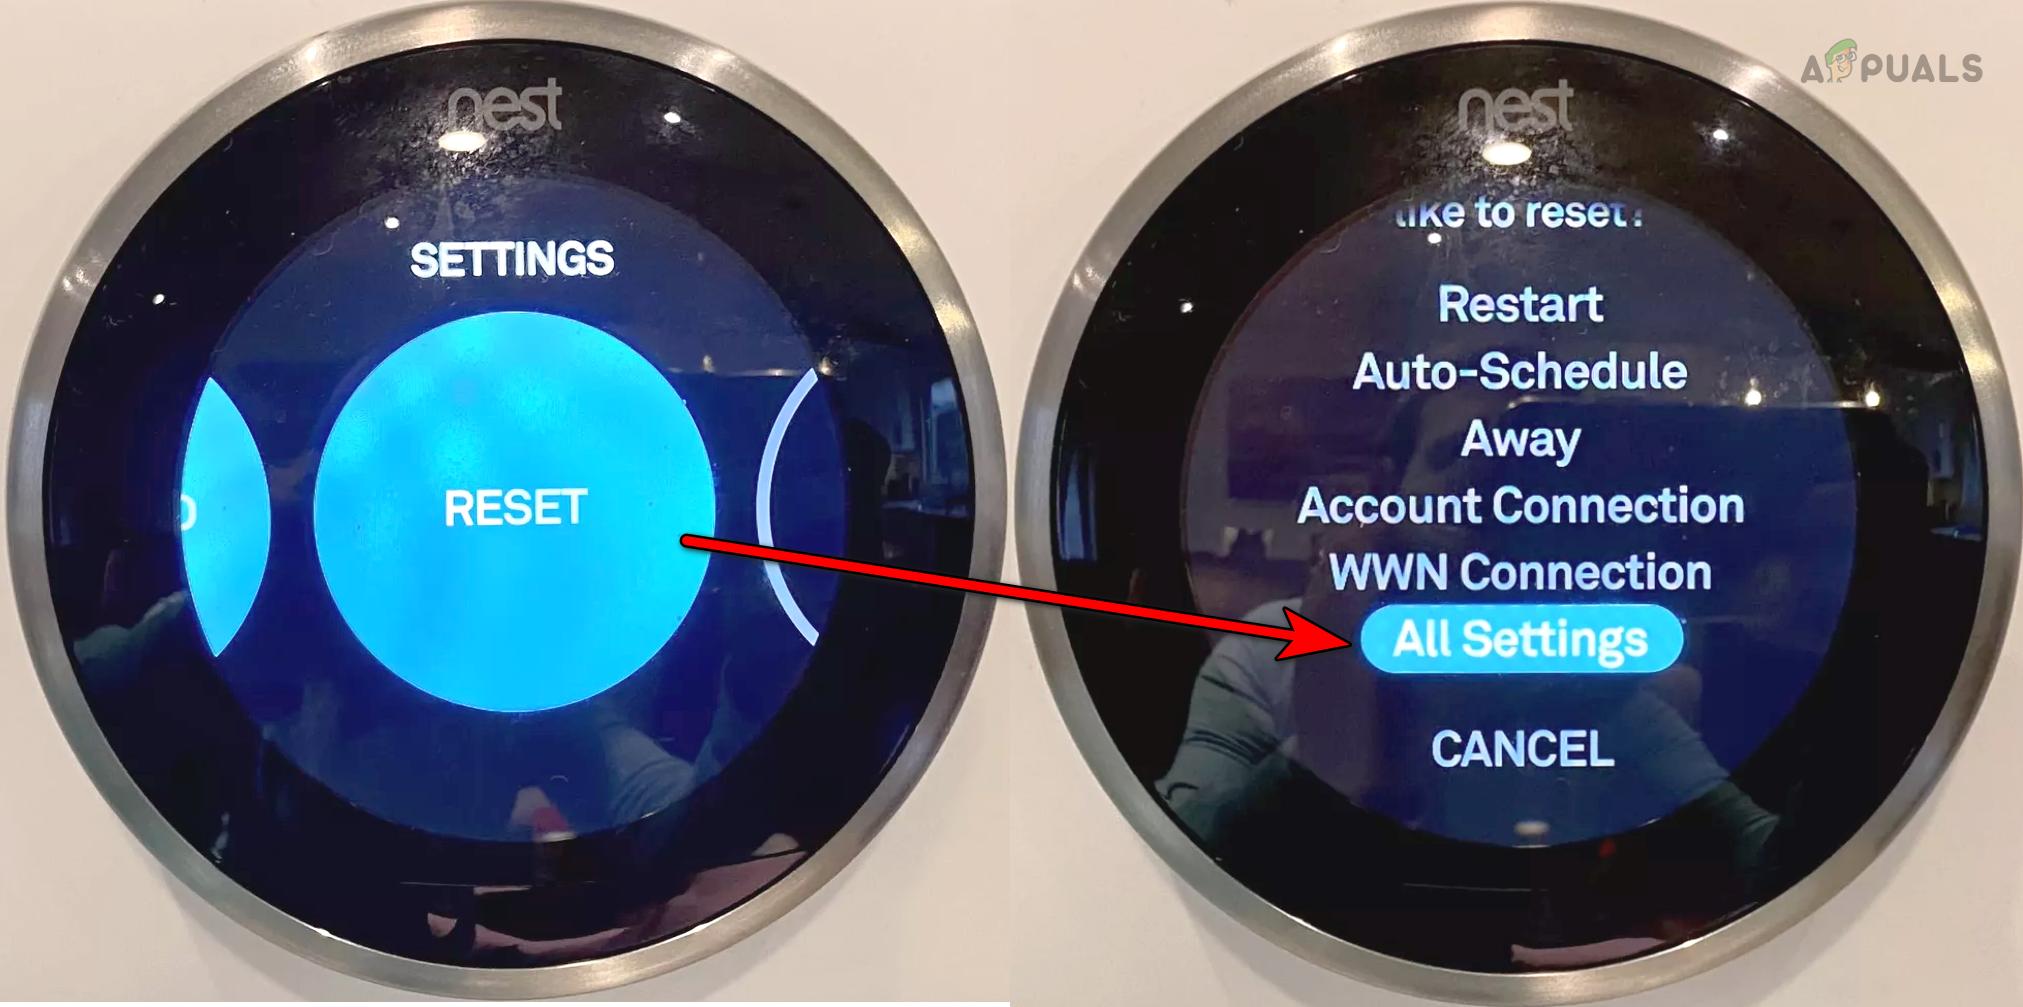 Reset All Settings on the Nest Thermostat